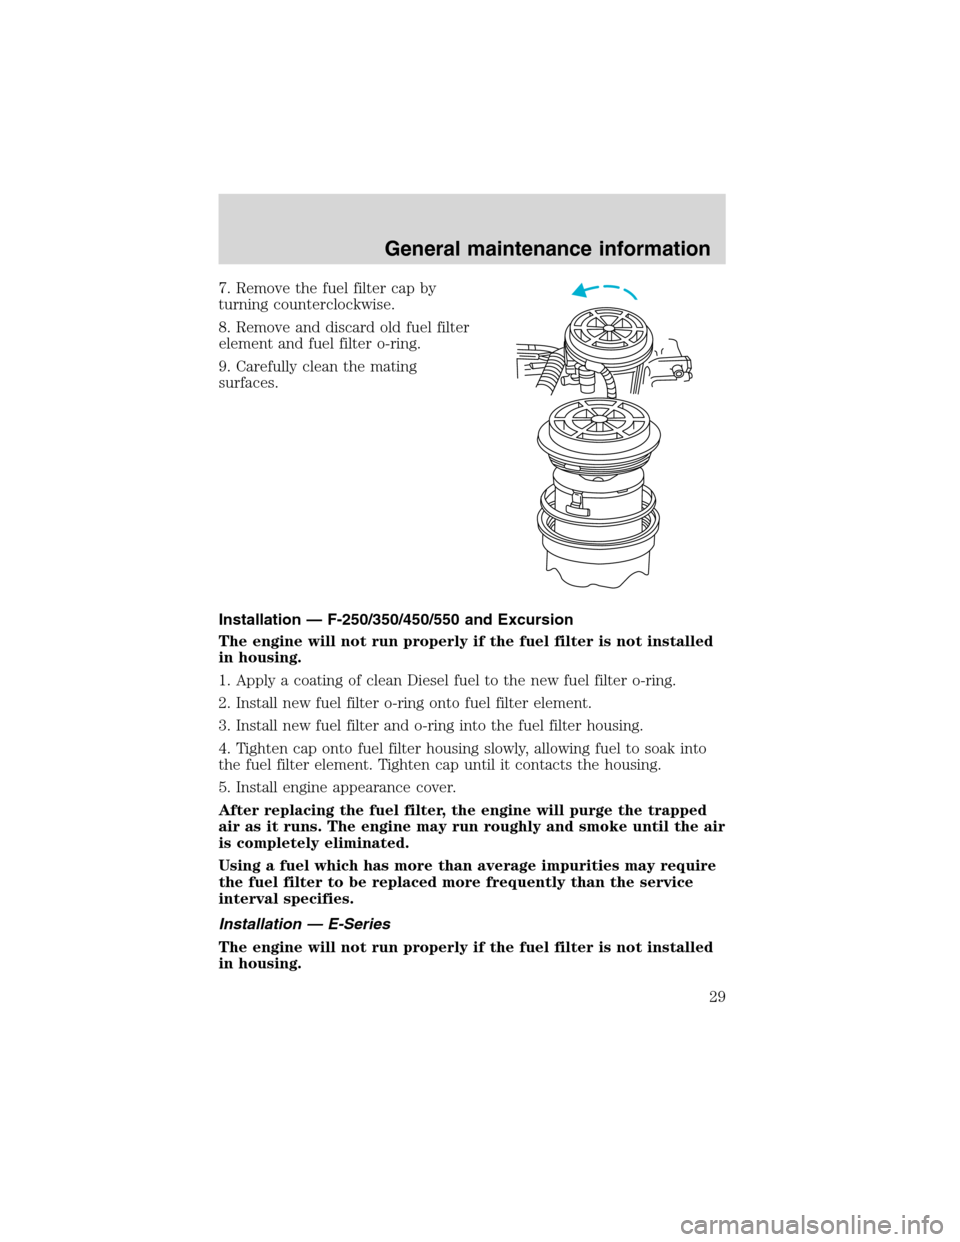 FORD SUPER DUTY 2003 1.G 7.3L Diesel Engine Owners Manual 7. Remove the fuel filter cap by
turning counterclockwise.
8. Remove and discard old fuel filter
element and fuel filter o-ring.
9. Carefully clean the mating
surfaces.
Installation—F-250/350/450/55